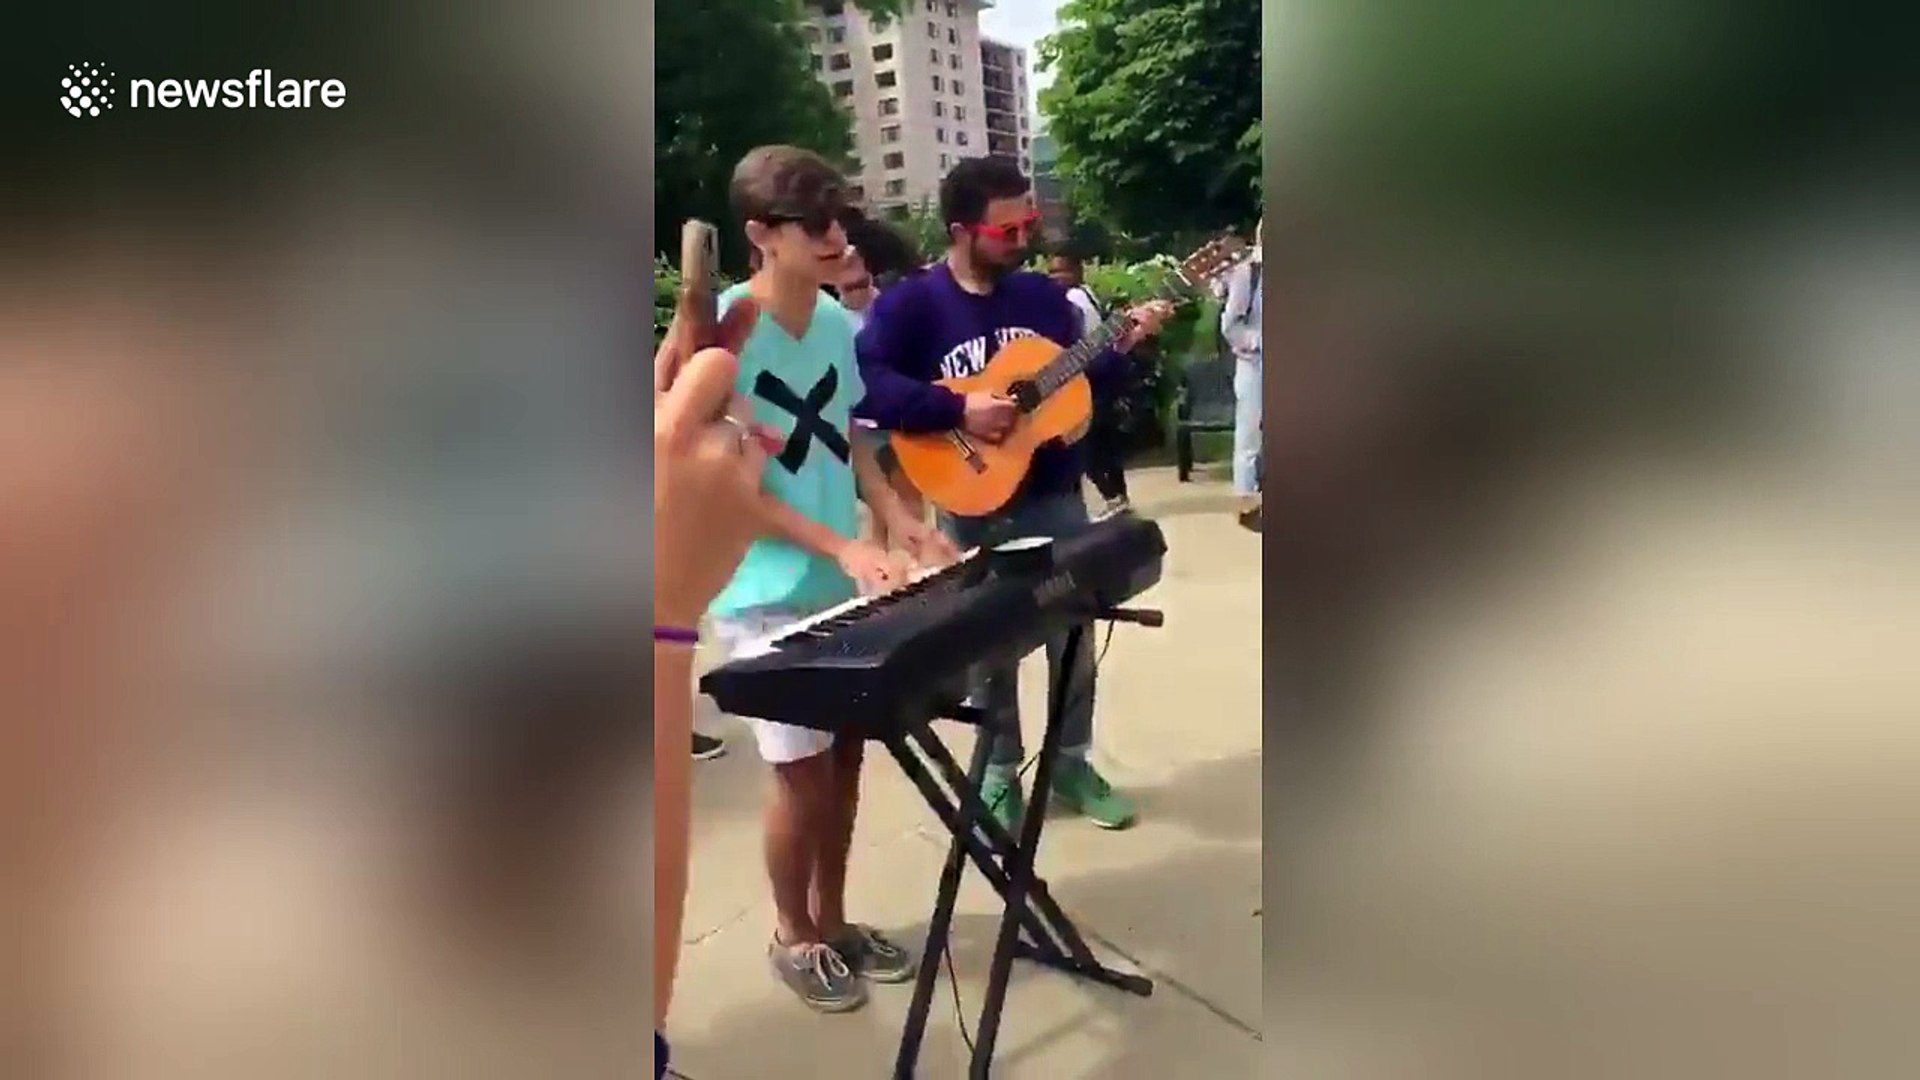 Romantic youngster performs Ed Sheeran song for prom proposal